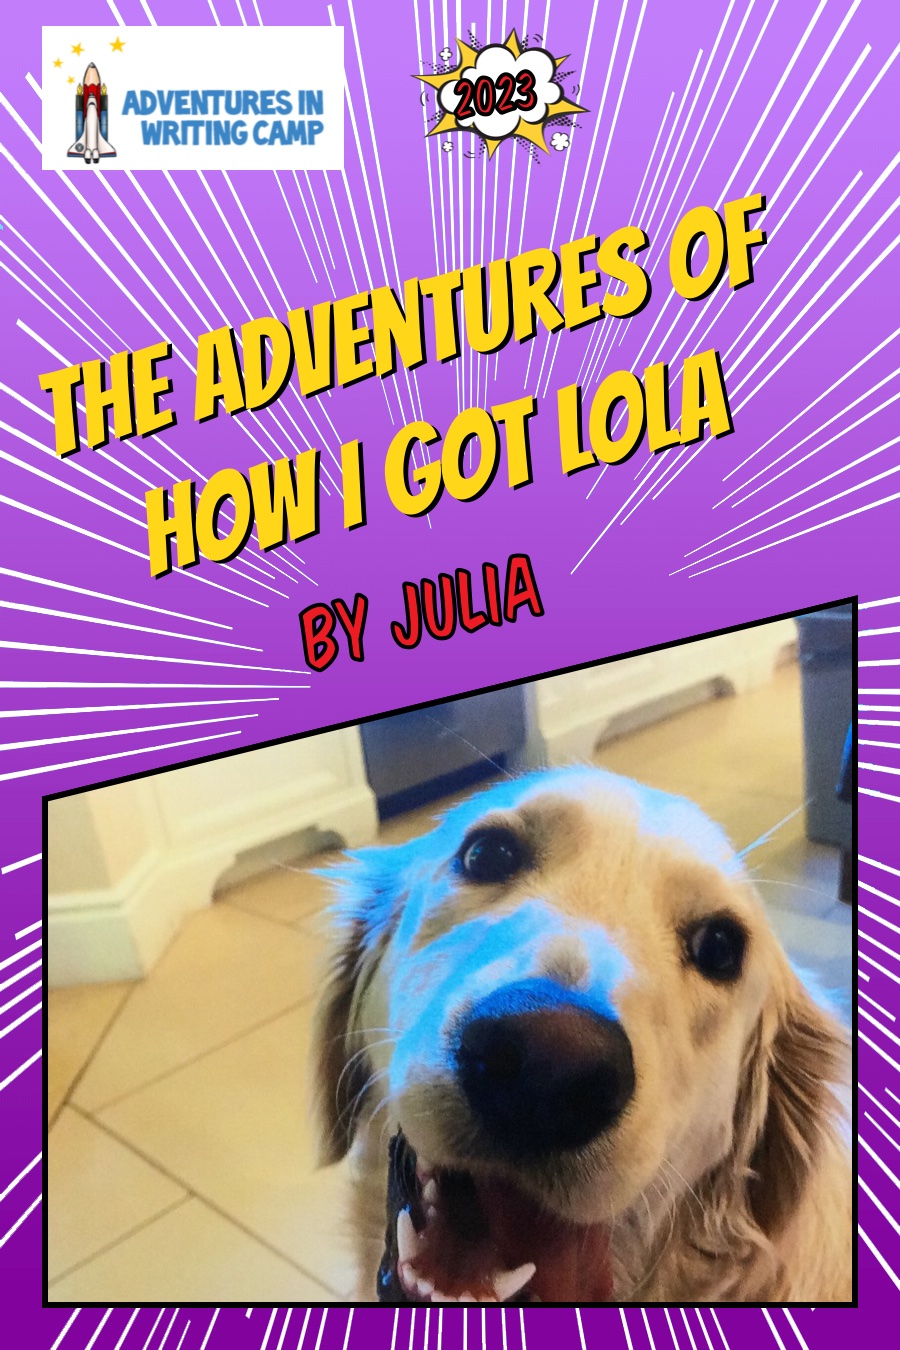 The Adventures of How I Got Lola by Julia H